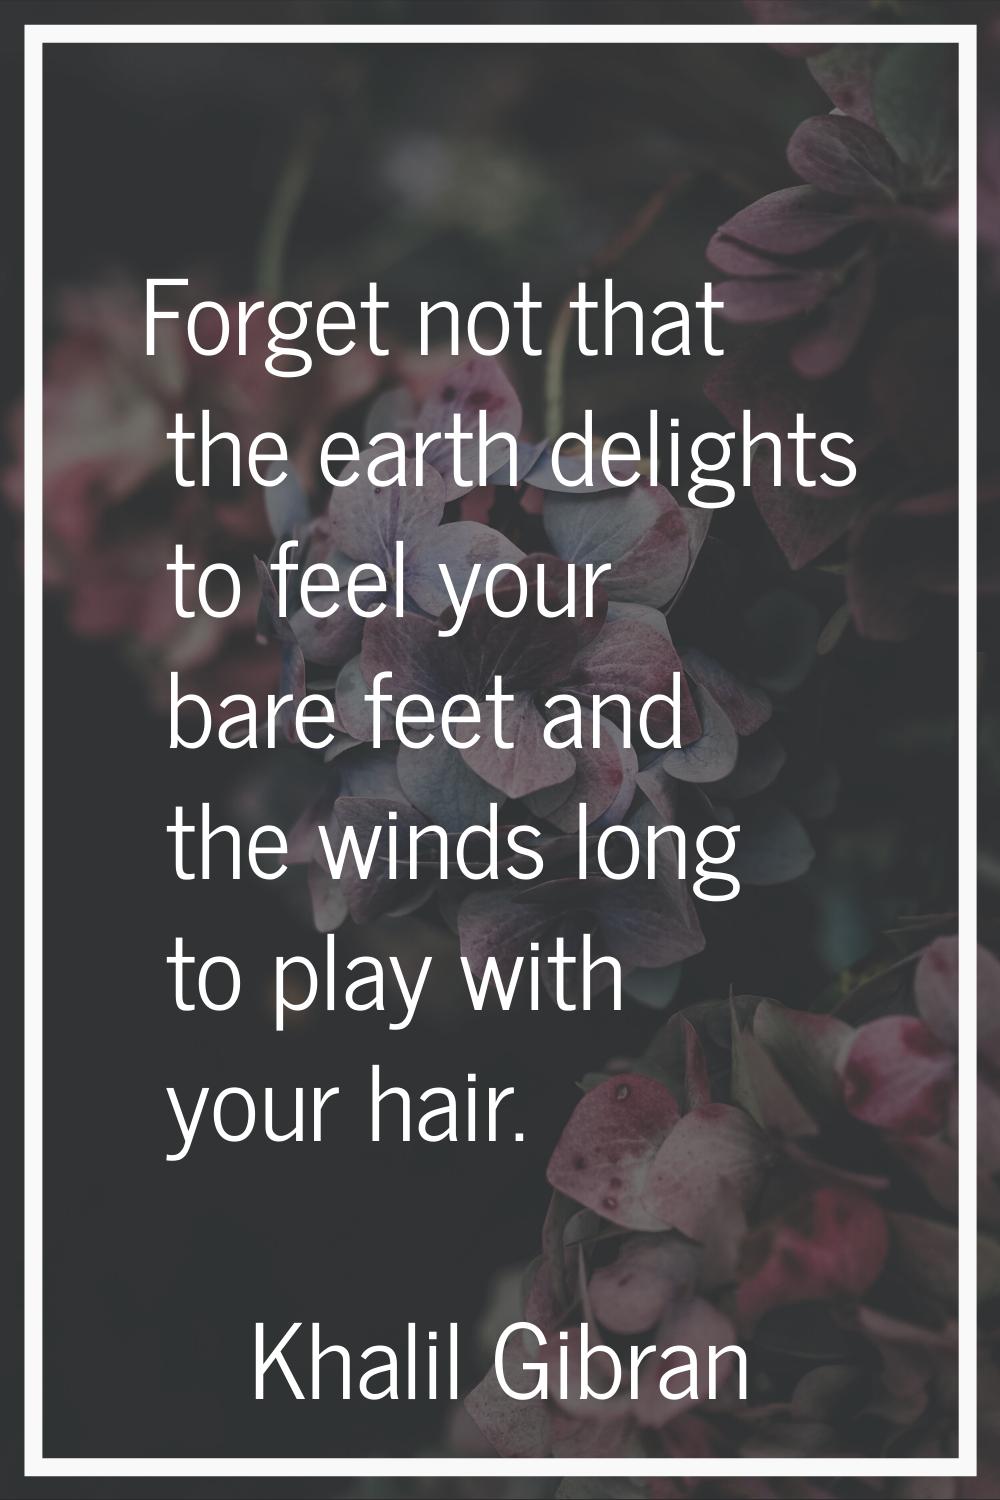 Forget not that the earth delights to feel your bare feet and the winds long to play with your hair